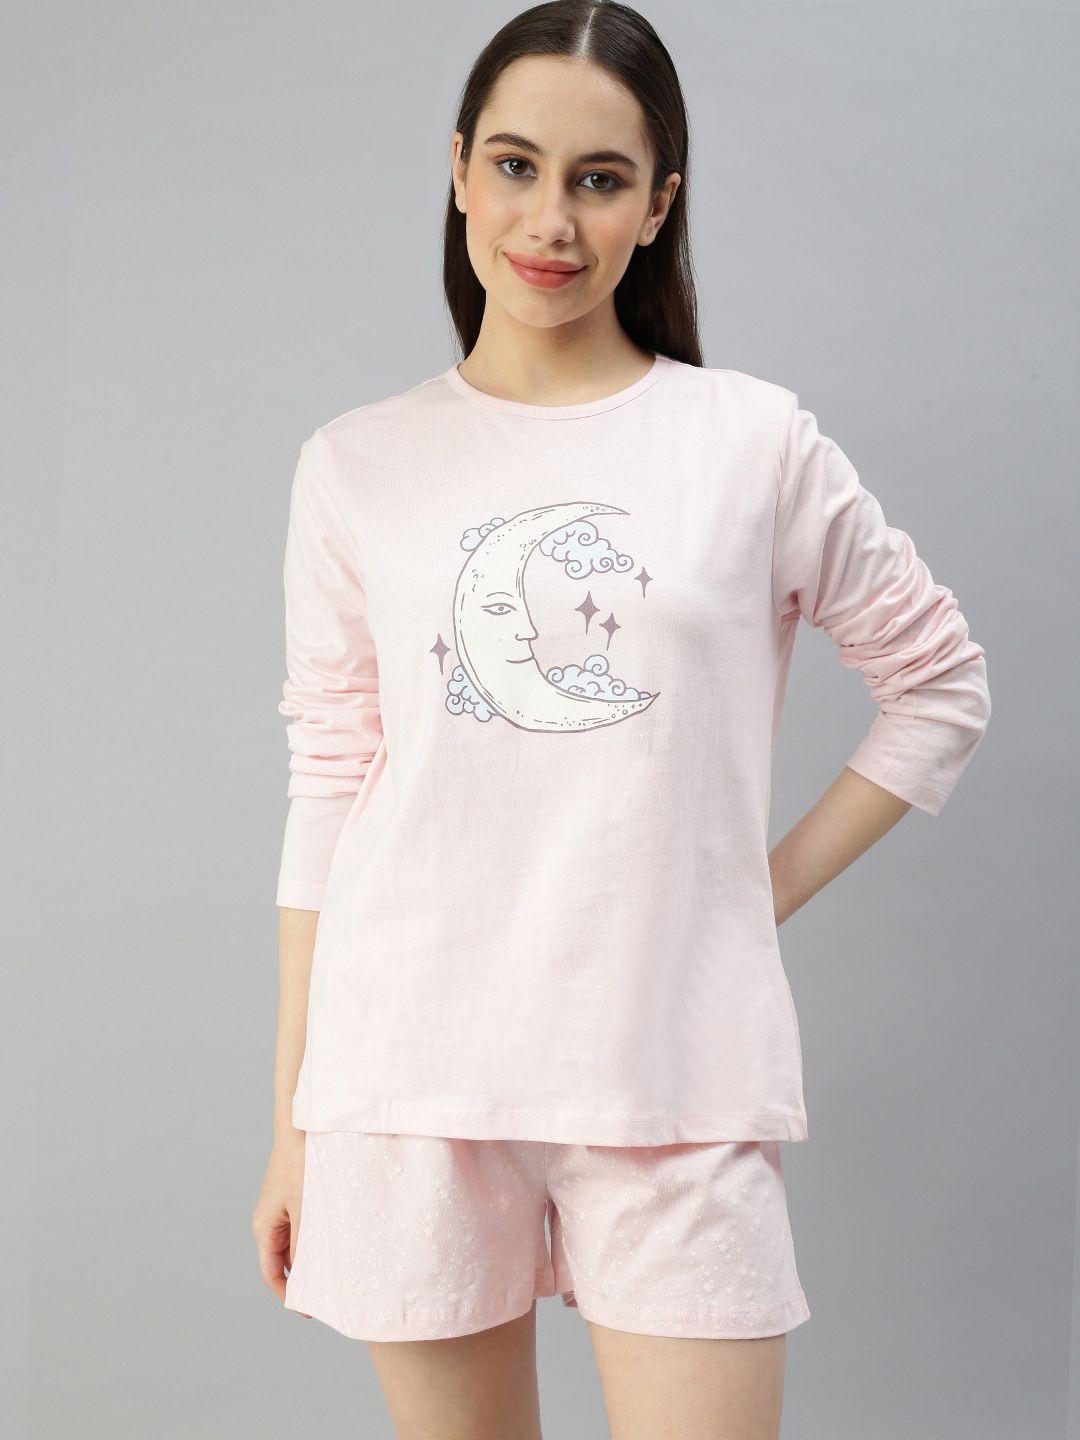 juneberry graphic printed pure cotton night suit